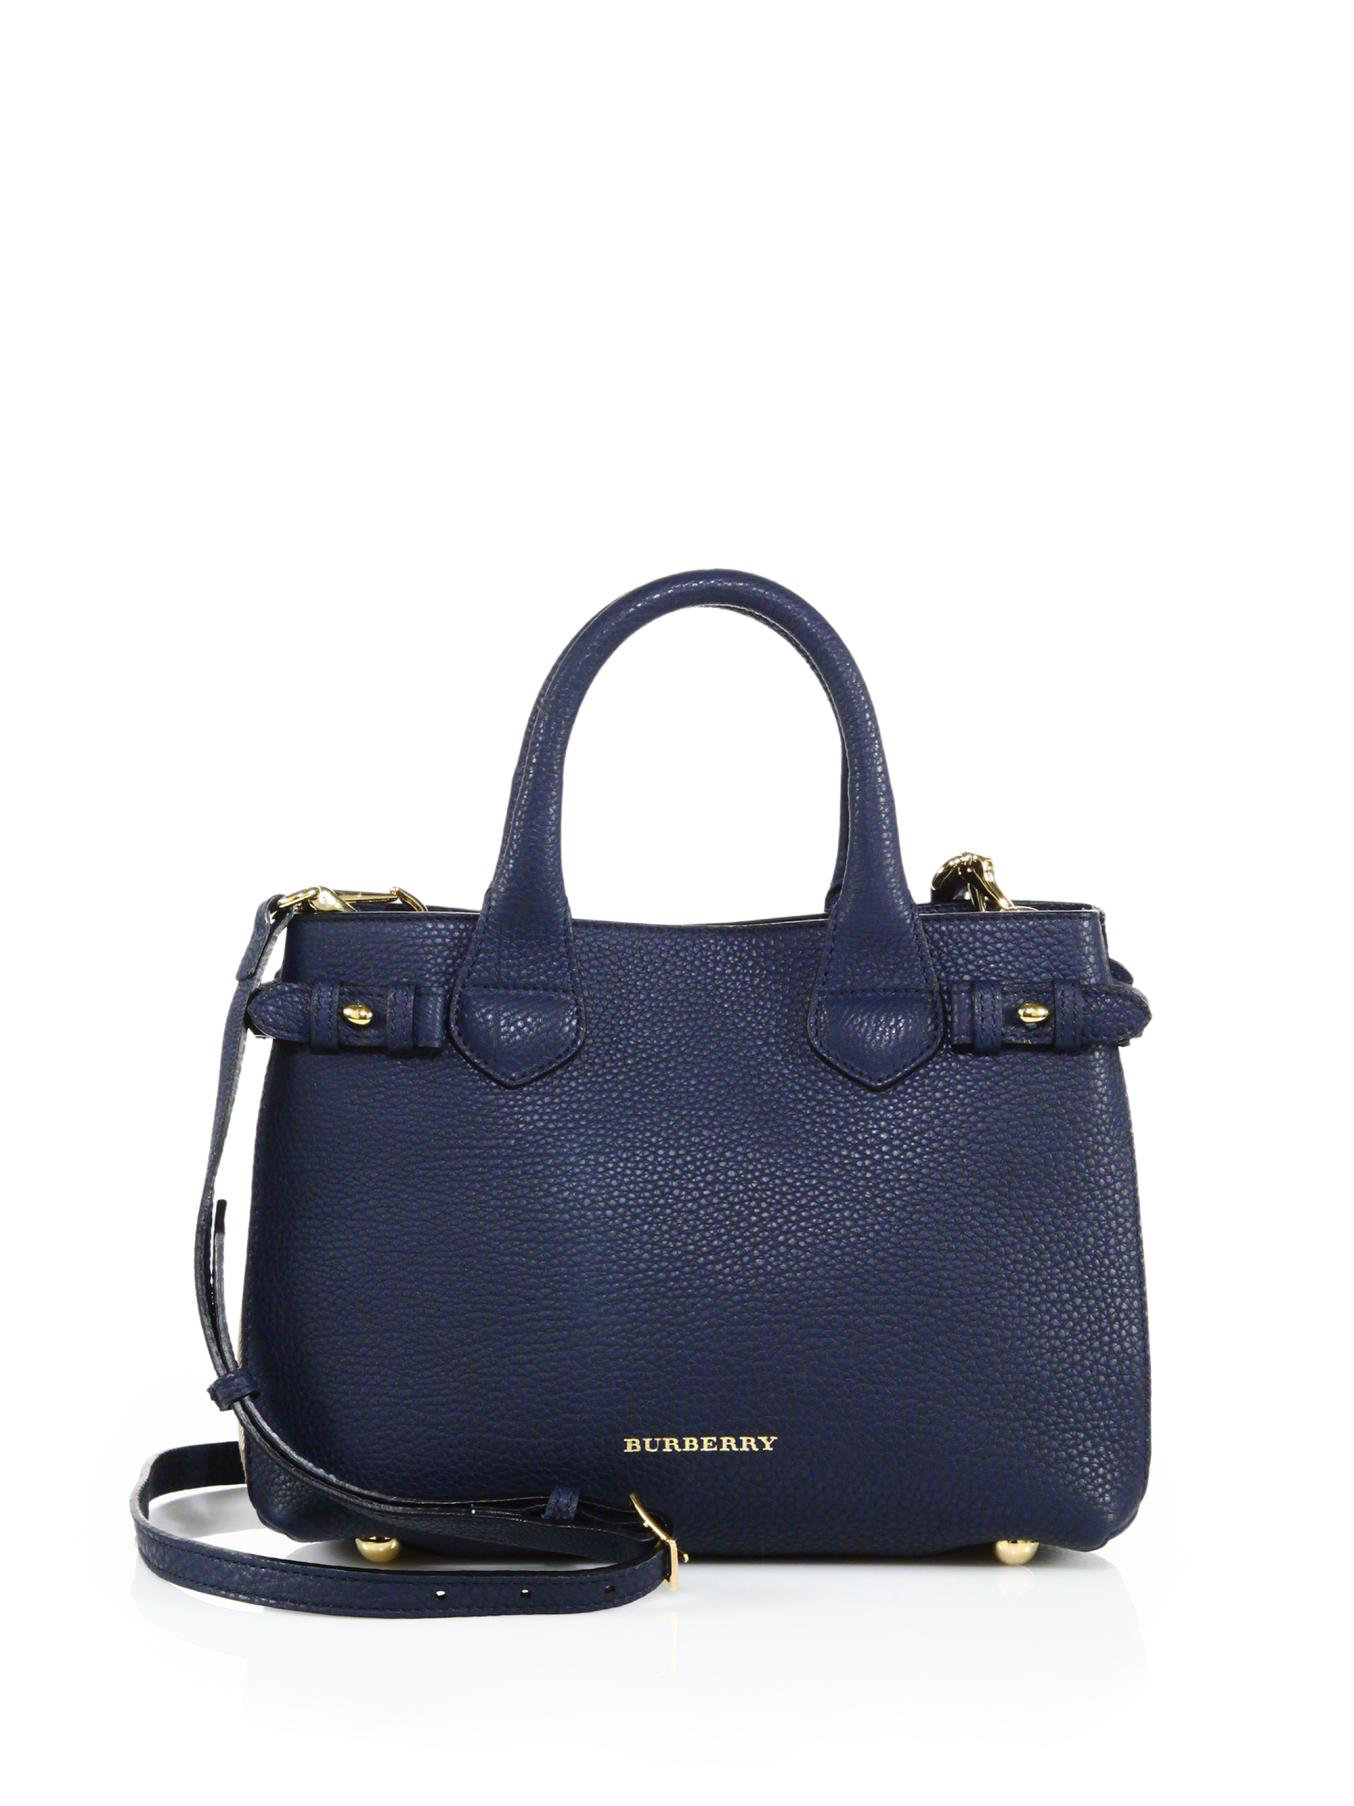 burberry midnight banner small leather check satchel blue product 0 086553571 normal